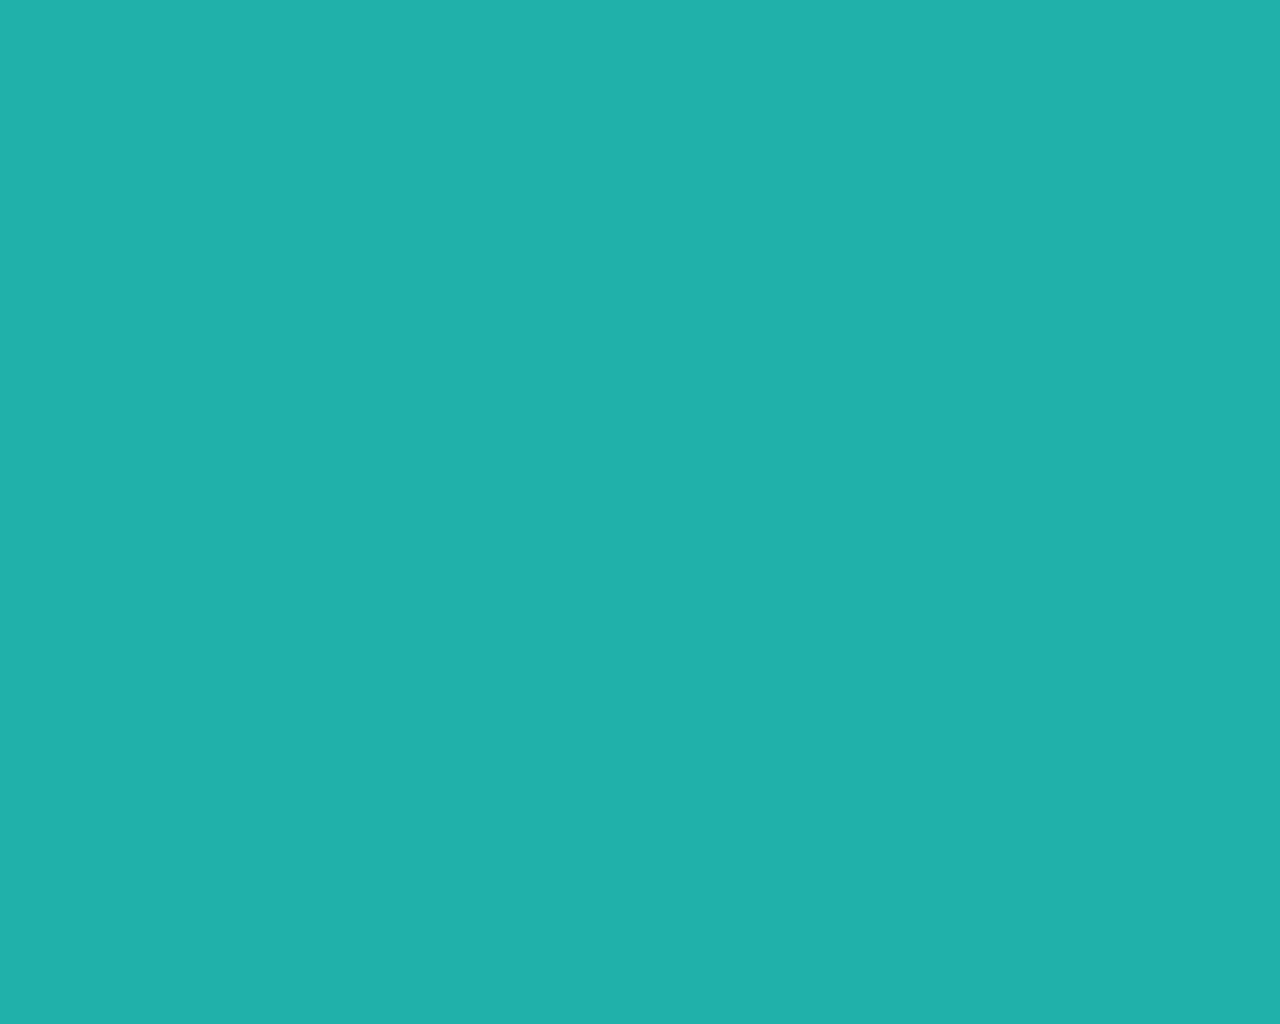 1280x1024 Light Sea Green Solid Color Background